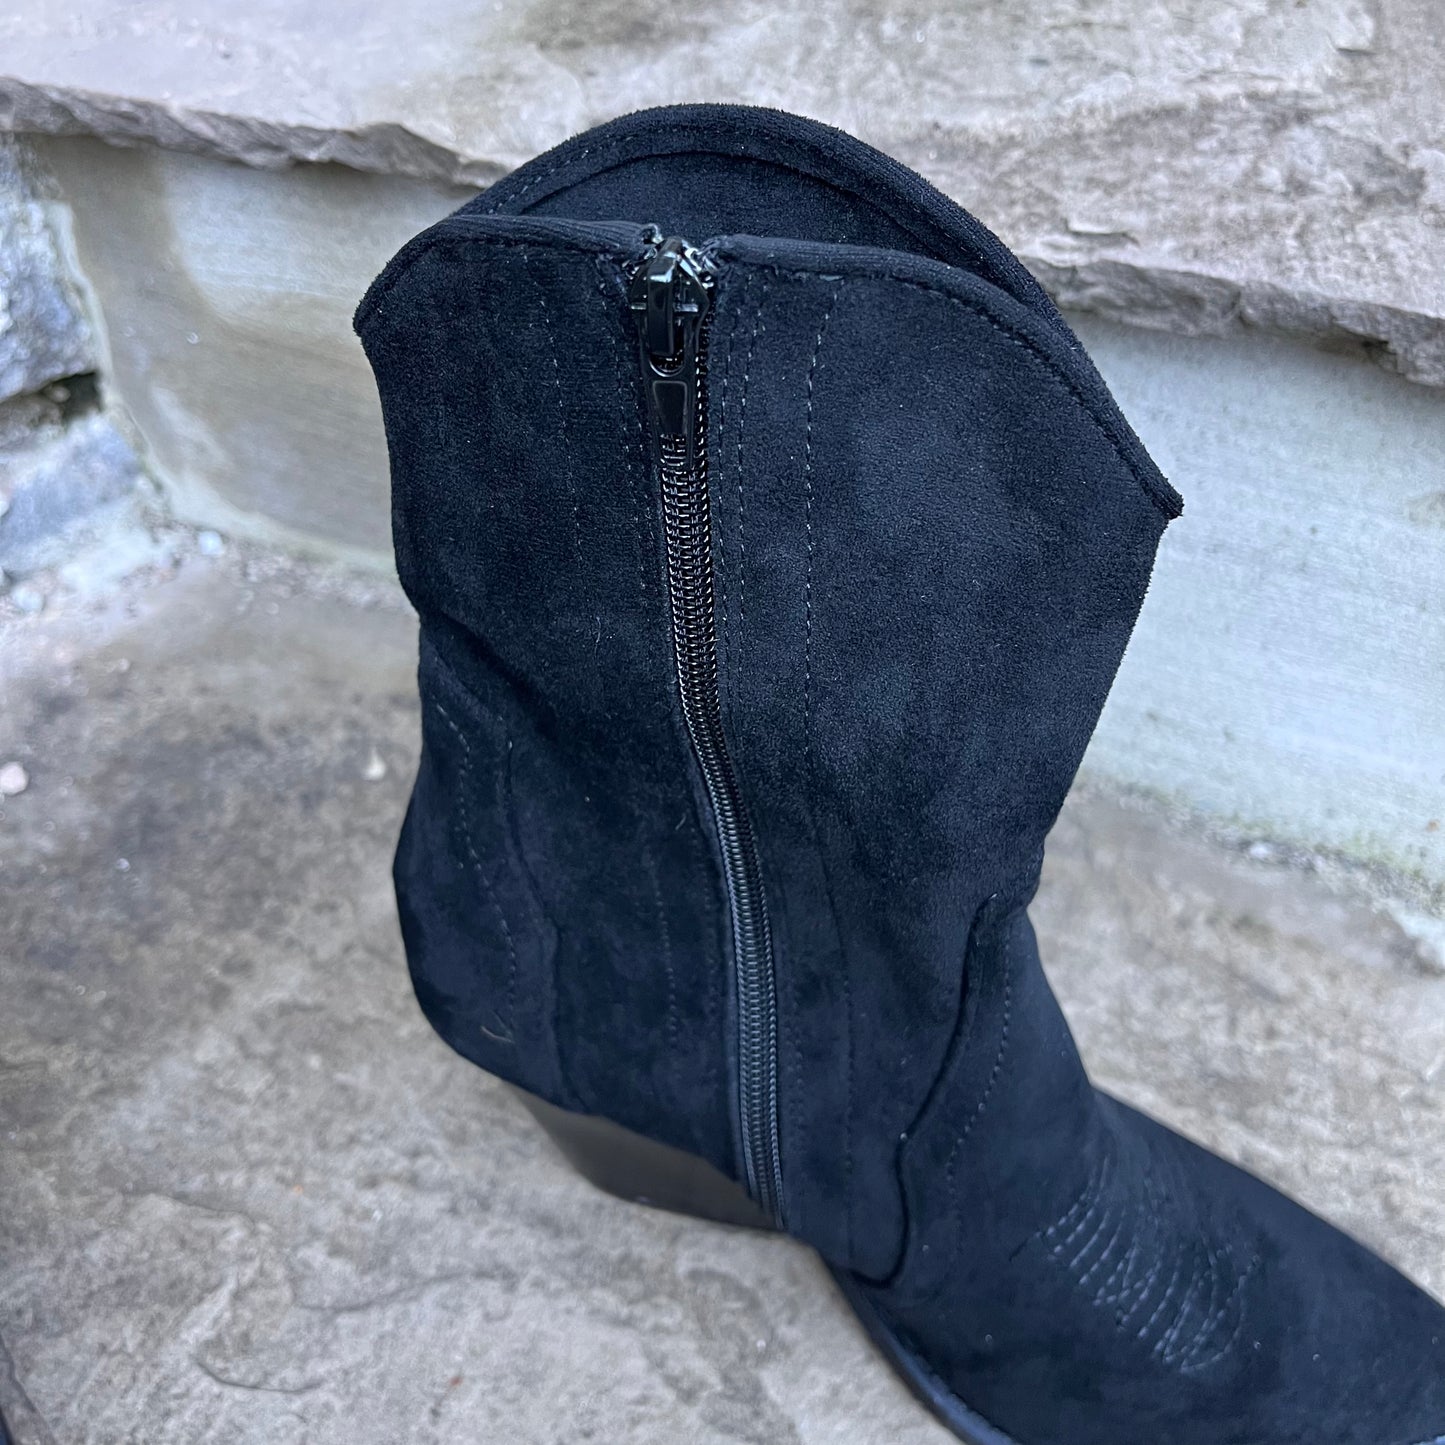 Western boots - black